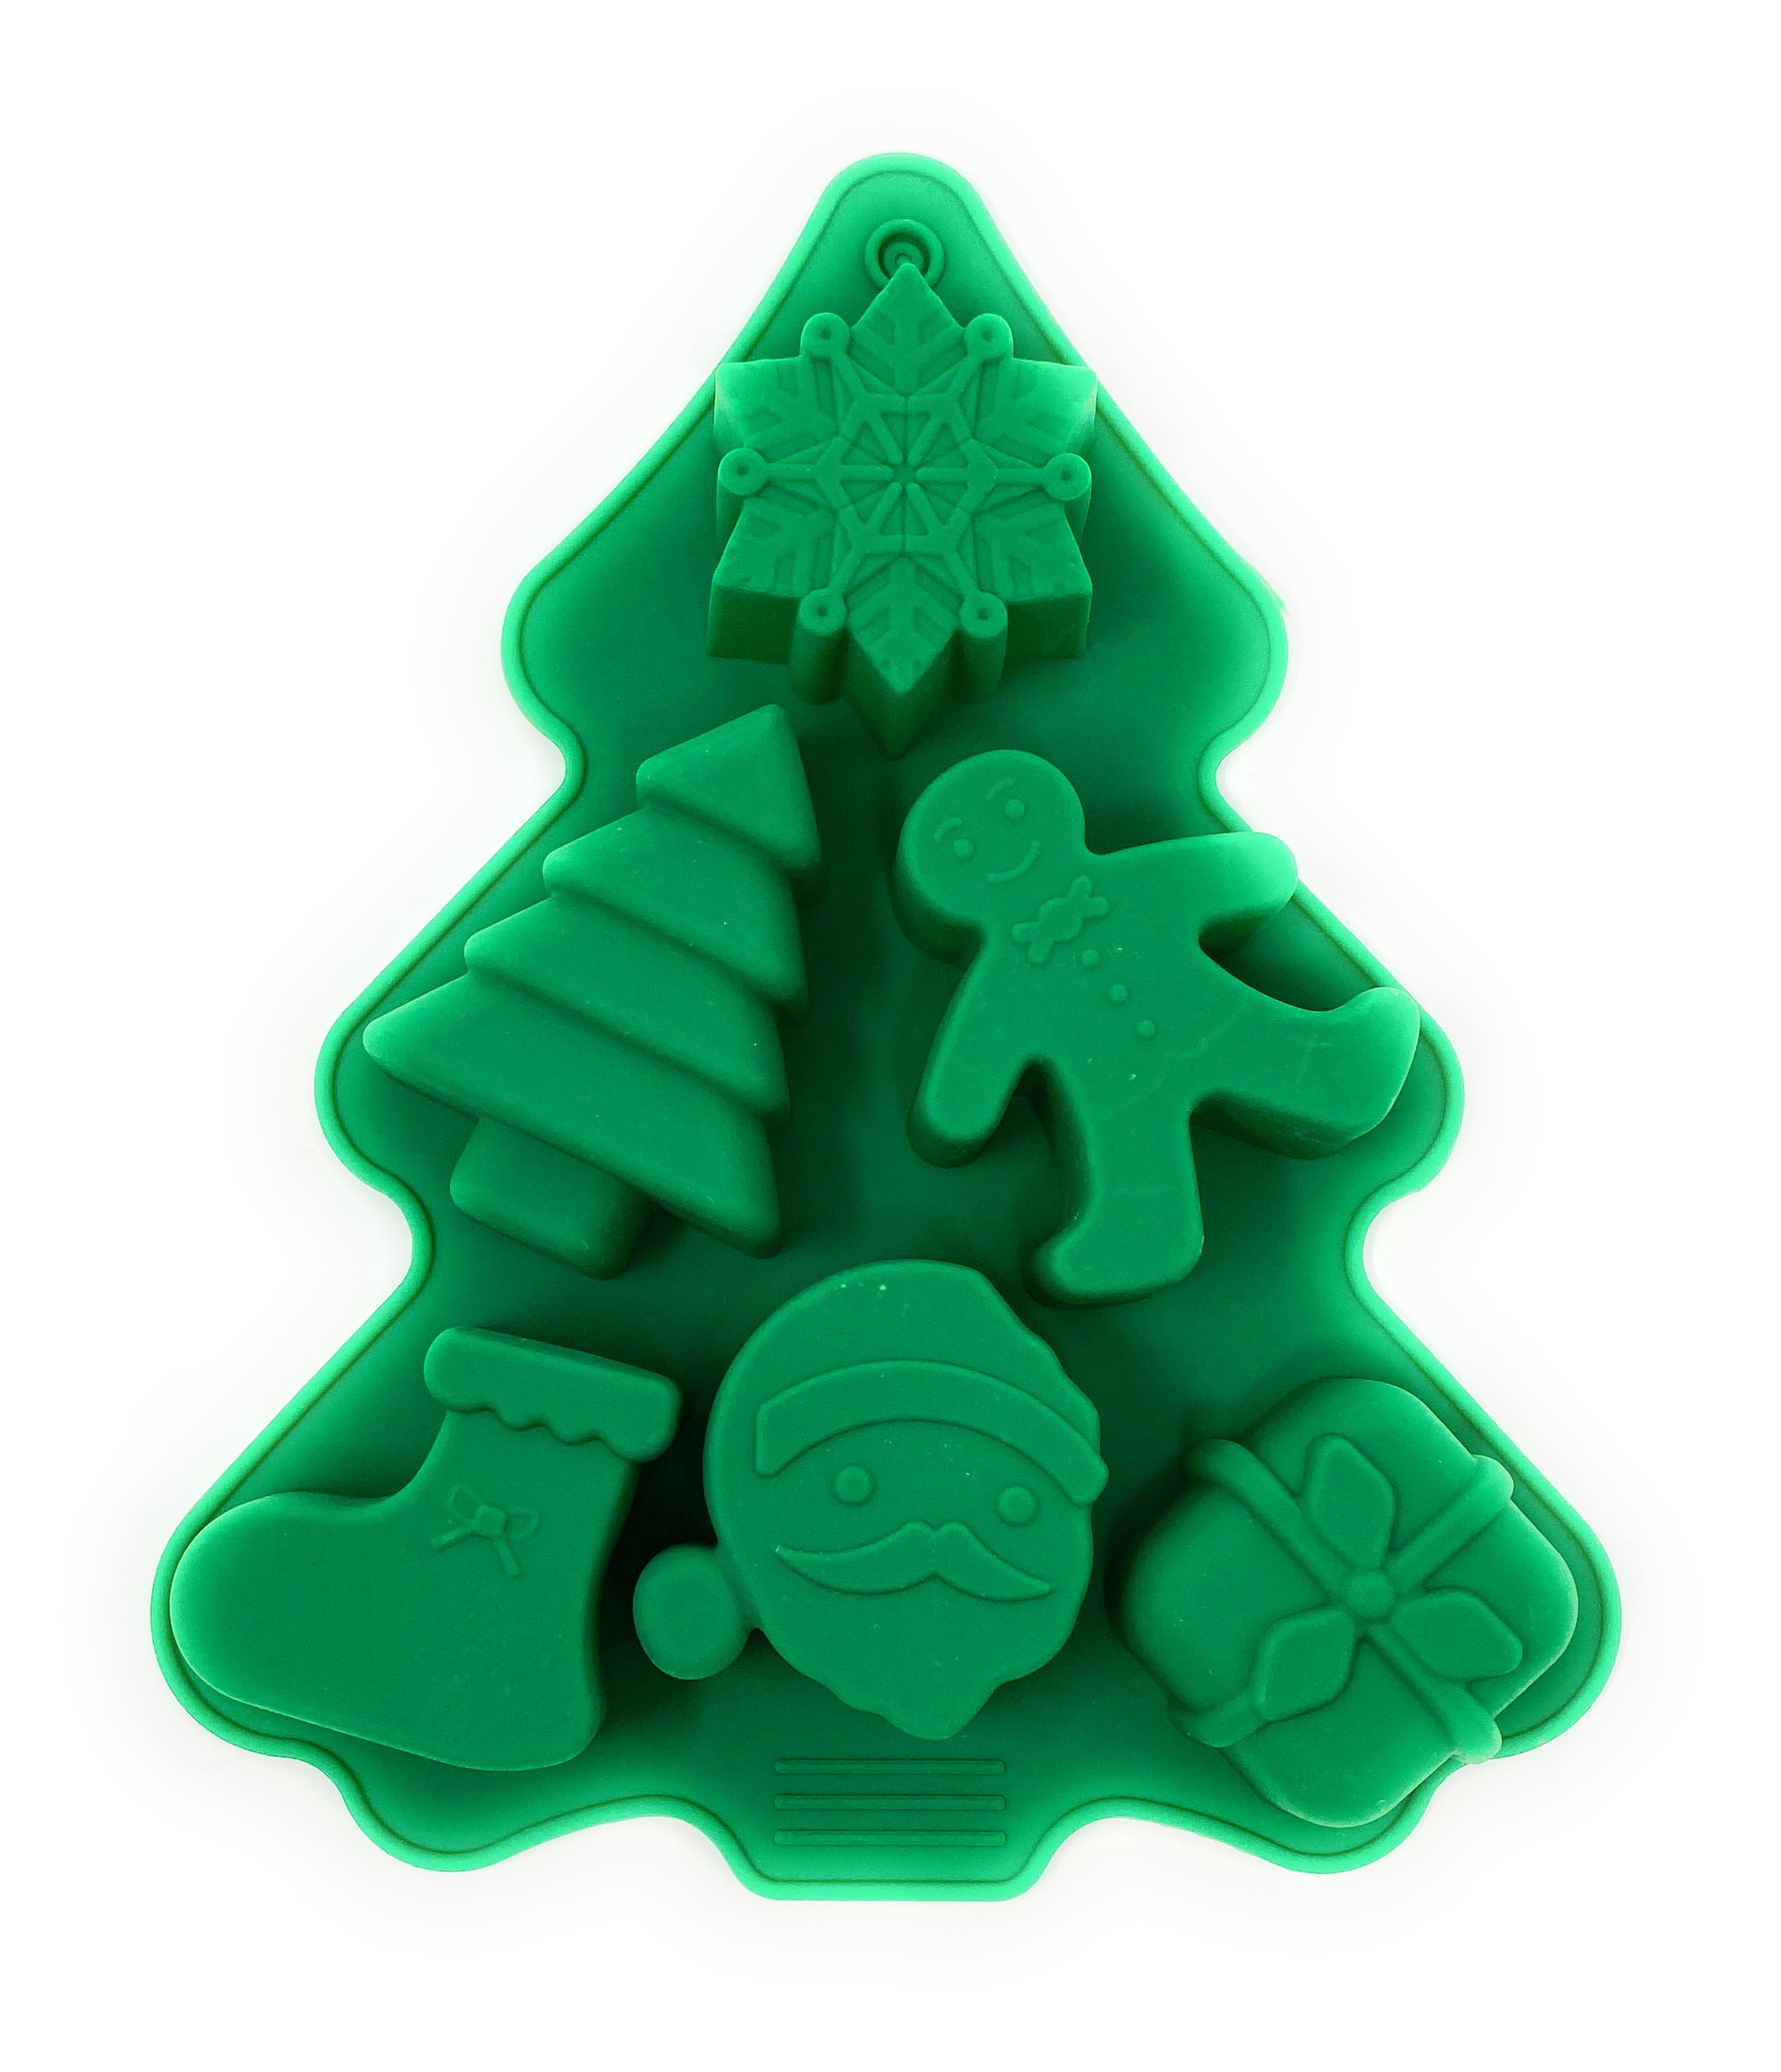 Christmas Silicone Molds Christmas Chocolate Mold Candy Molds for Baking  Sweet Treats,Cake Xmas Gift Handmade Soap Candles with Shape of Christmas